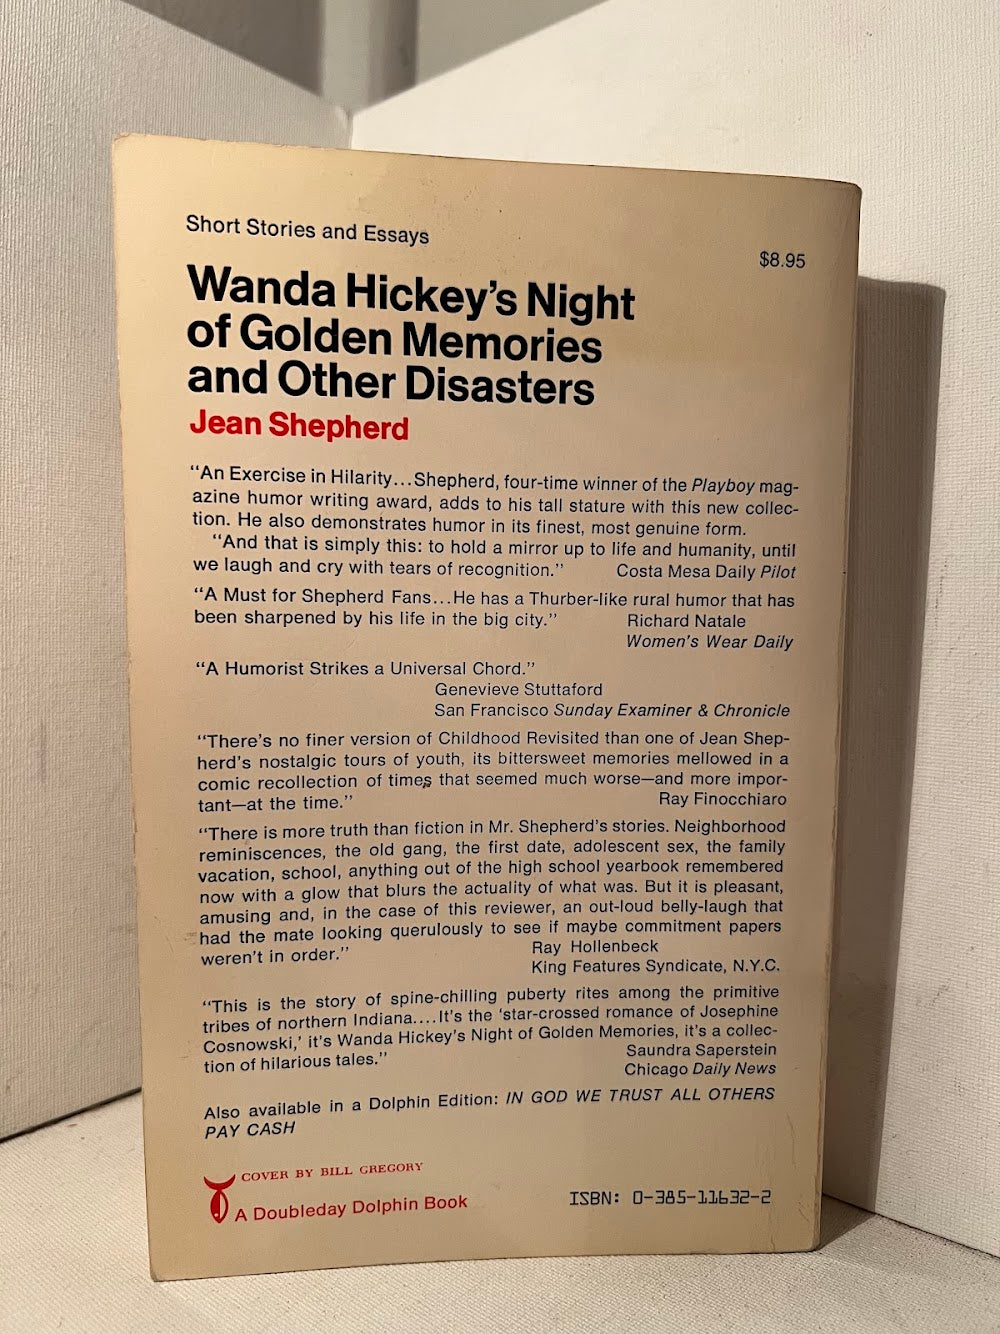 Wanda Hickey's Night of Golden Memories and Other Disasters by Jean Shepherd